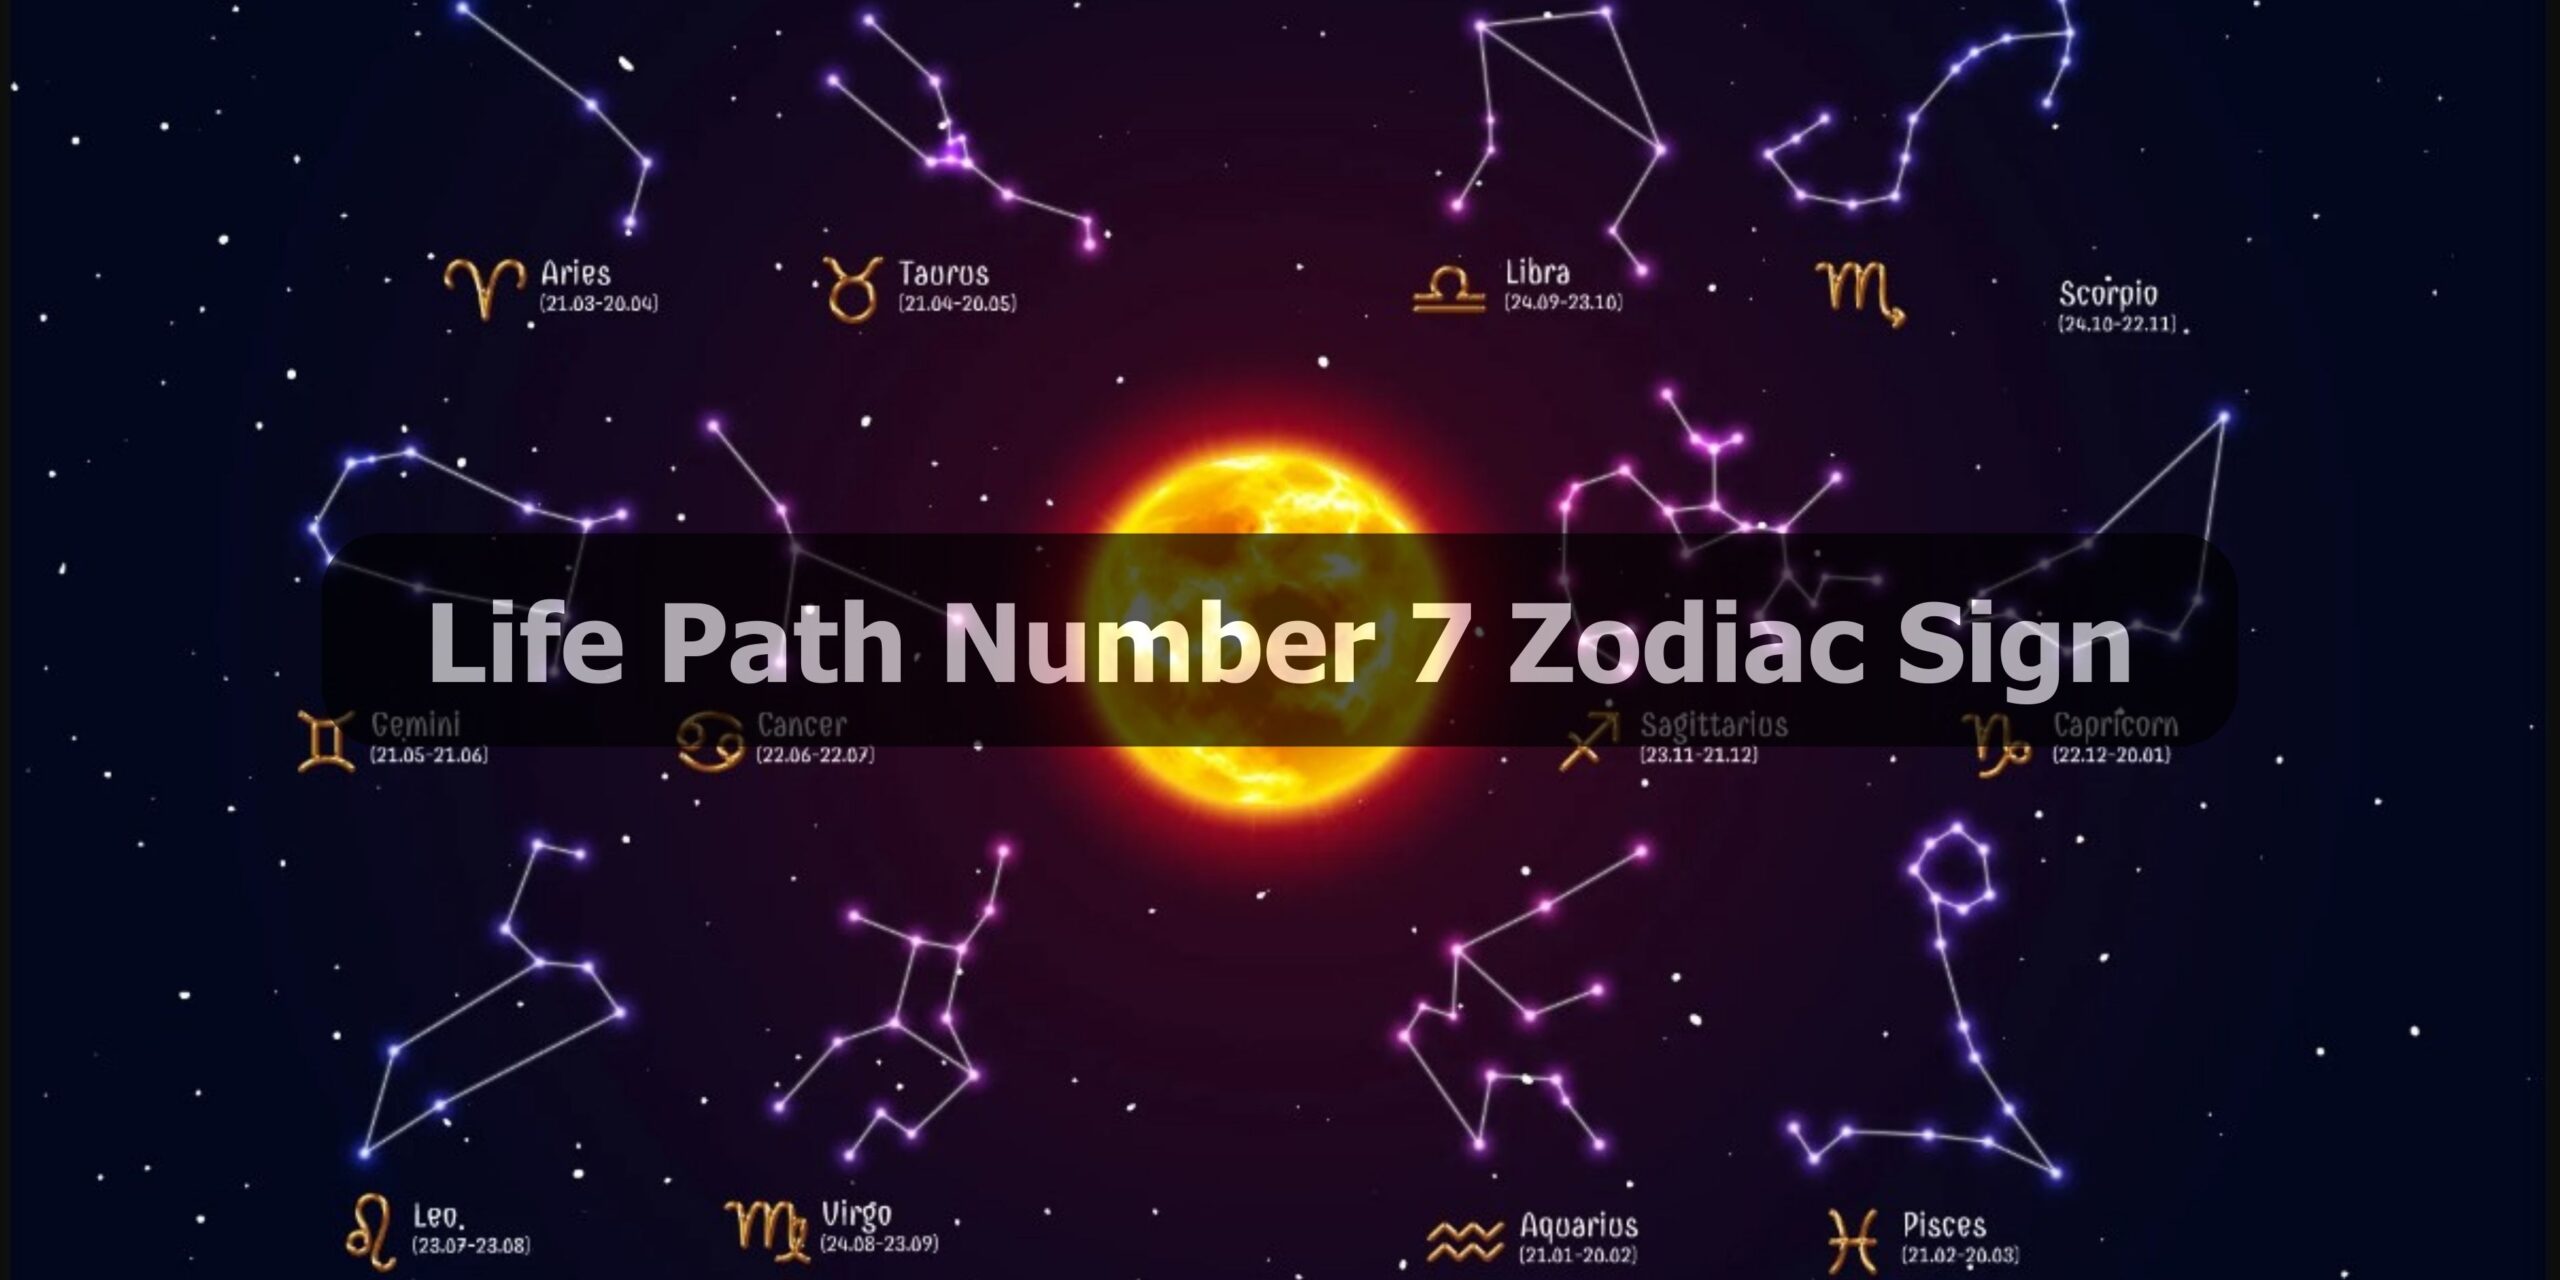 Life Path Number 7 Zodiac Sign